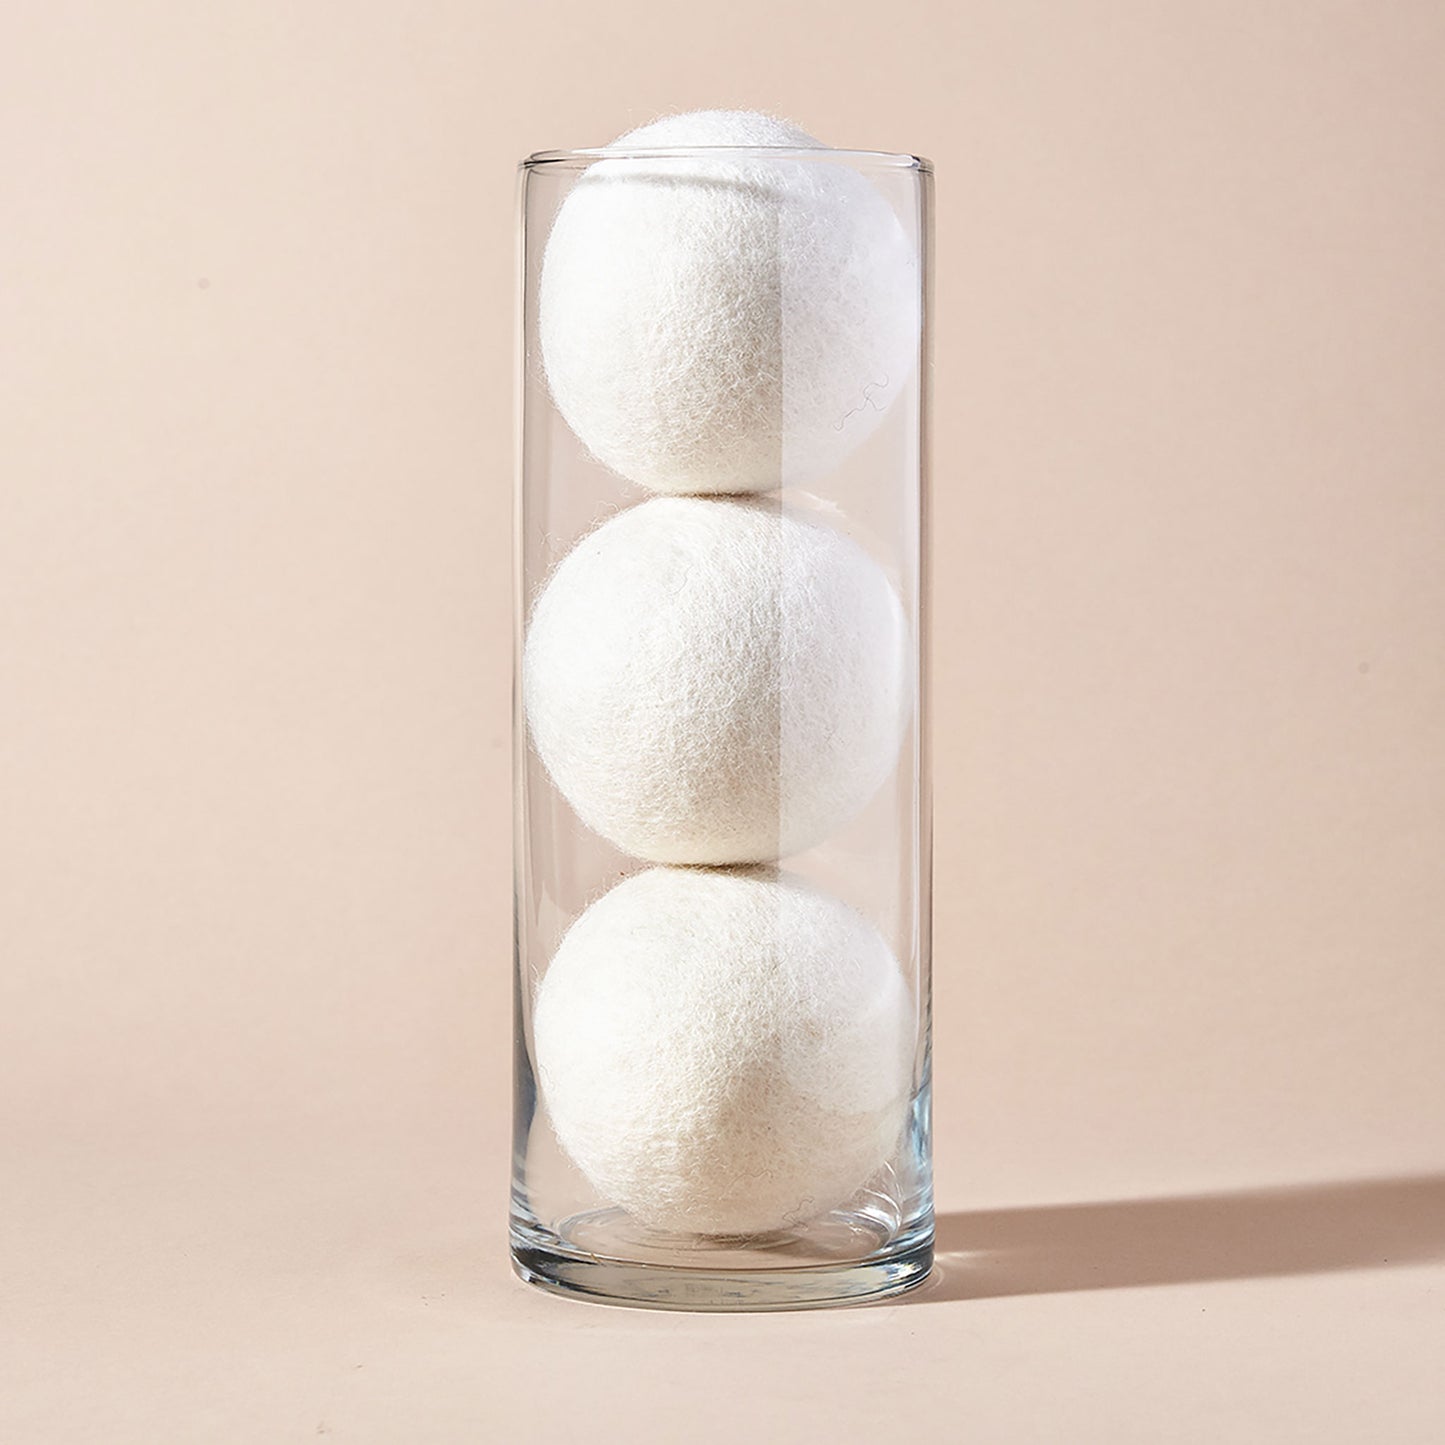 A stack of three white wool dryer balls displayed in a clear tubular glass container with a beige backdrop